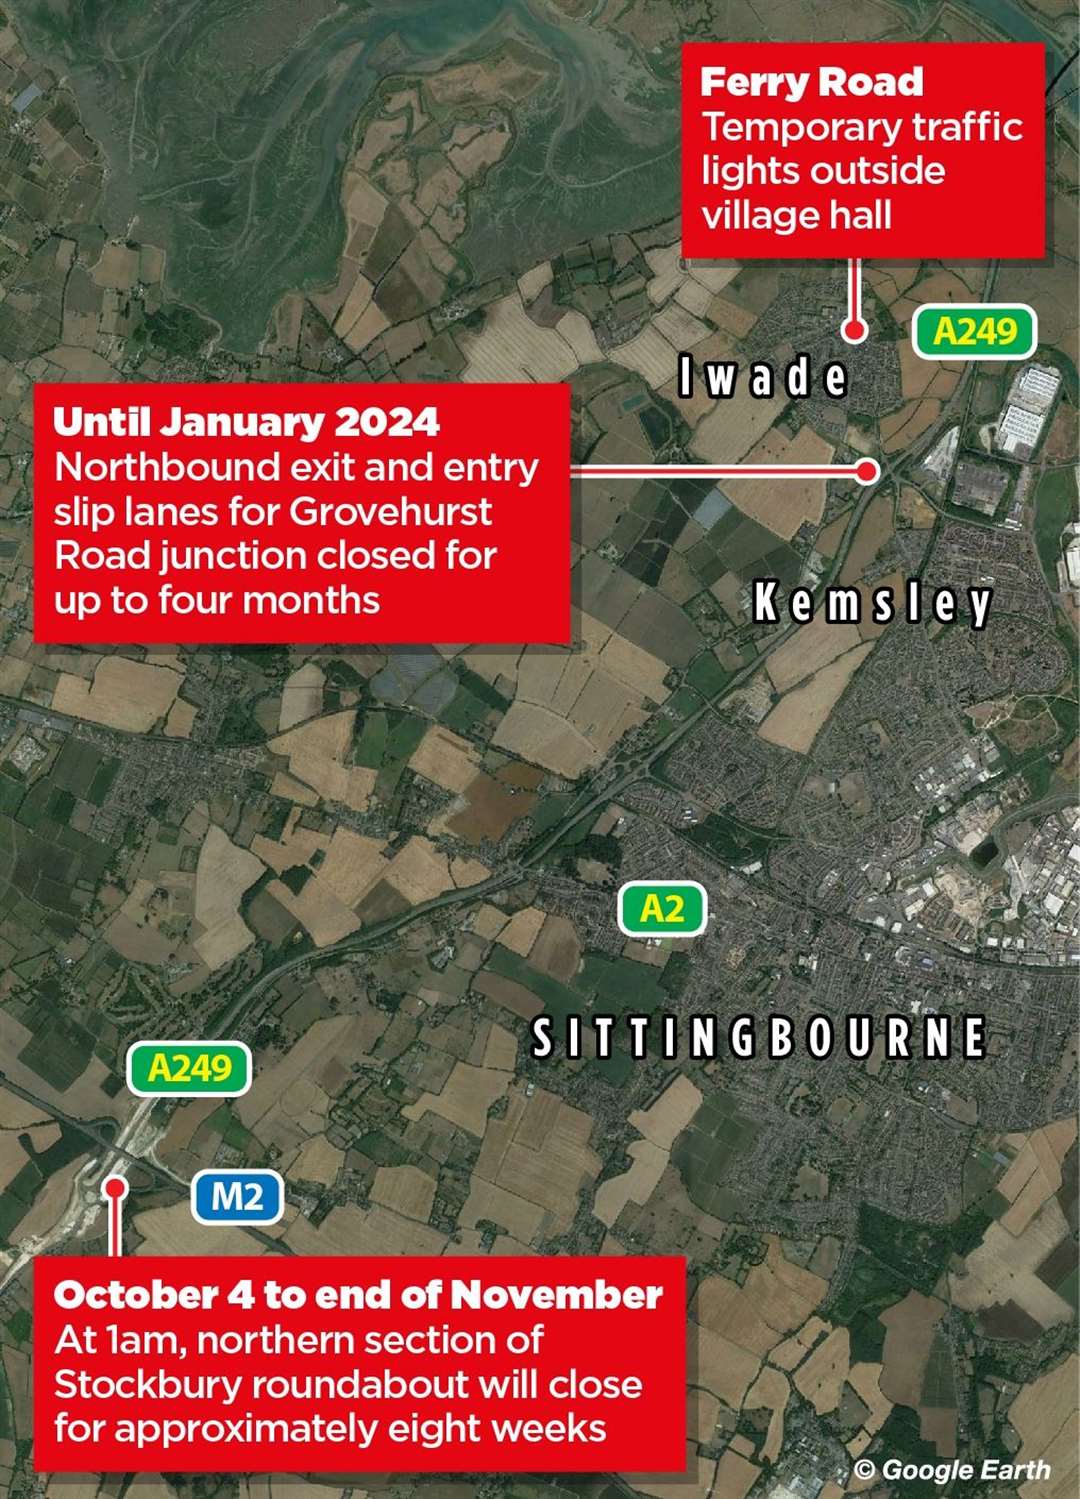 More road works are on their way and are set to last over a year